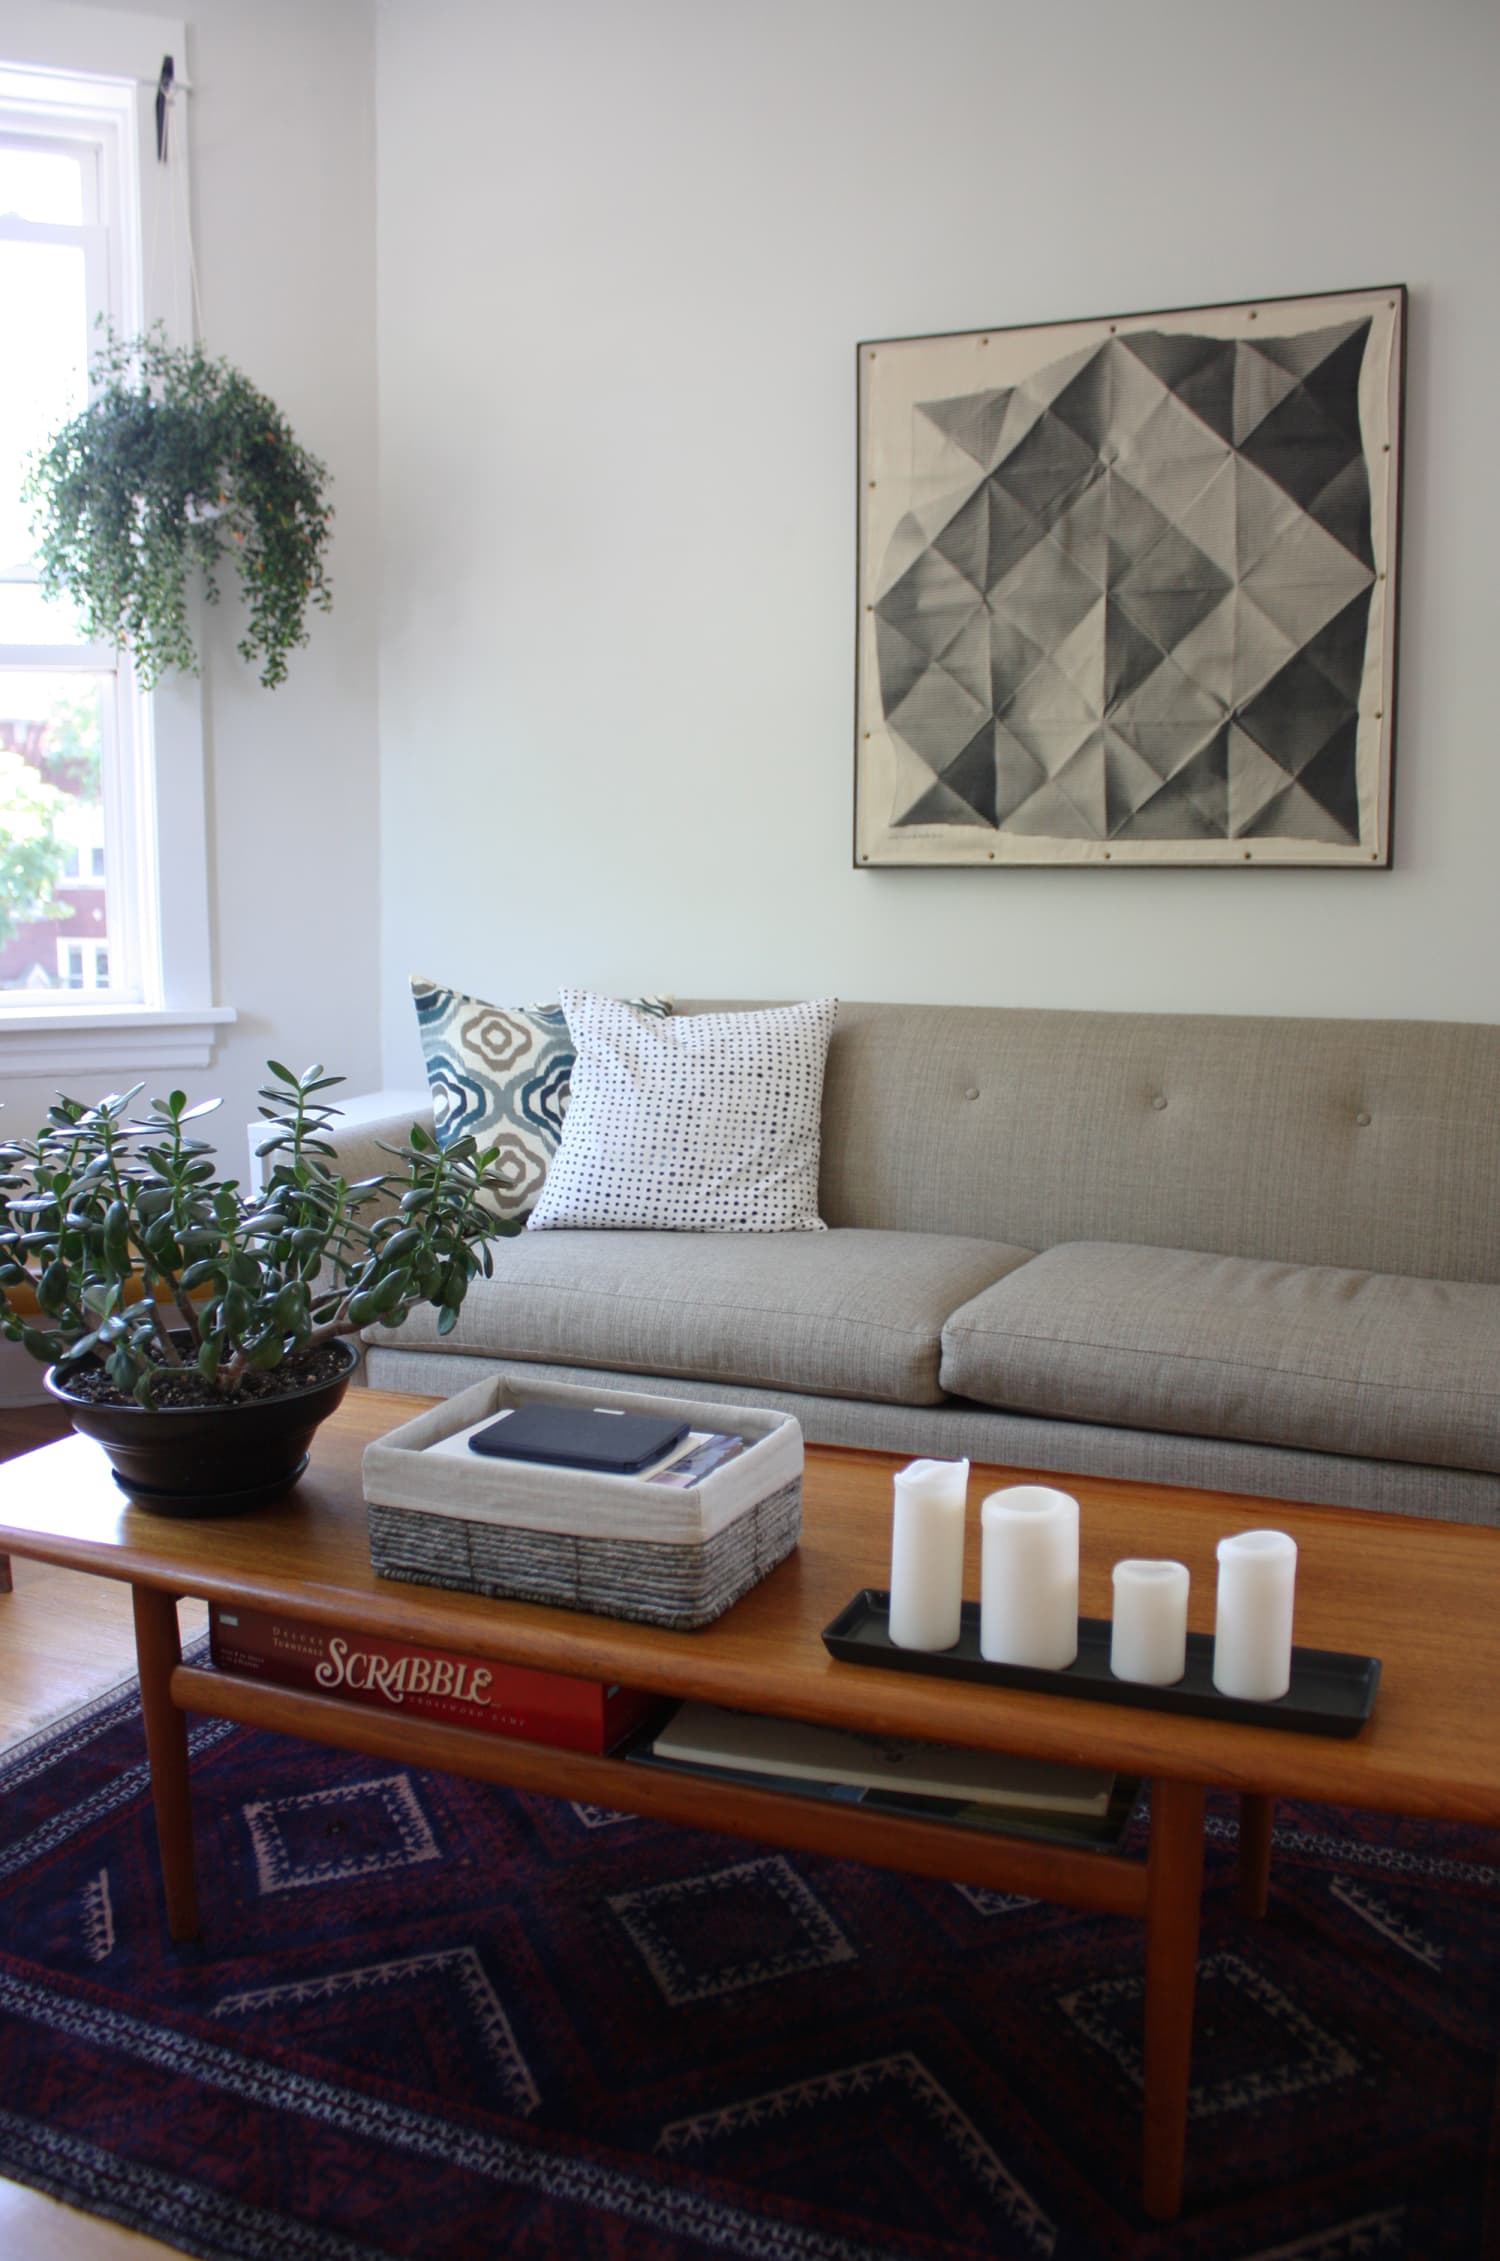 Cheap, Yet Chic: Low Cost Living Room Design Ideas ...